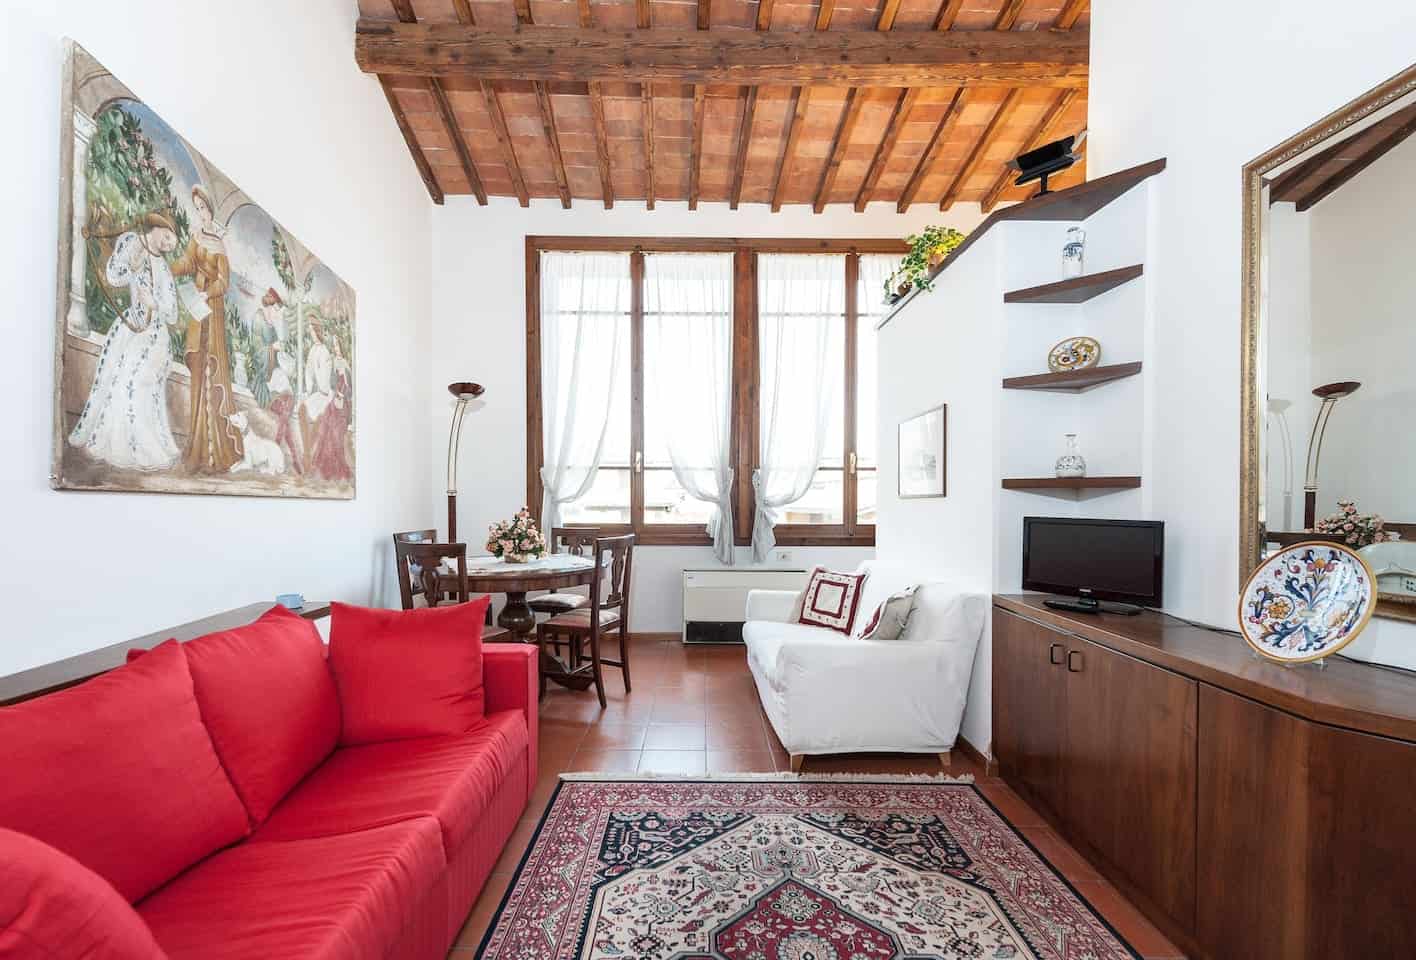 Image of Airbnb rental in Florence, Italy